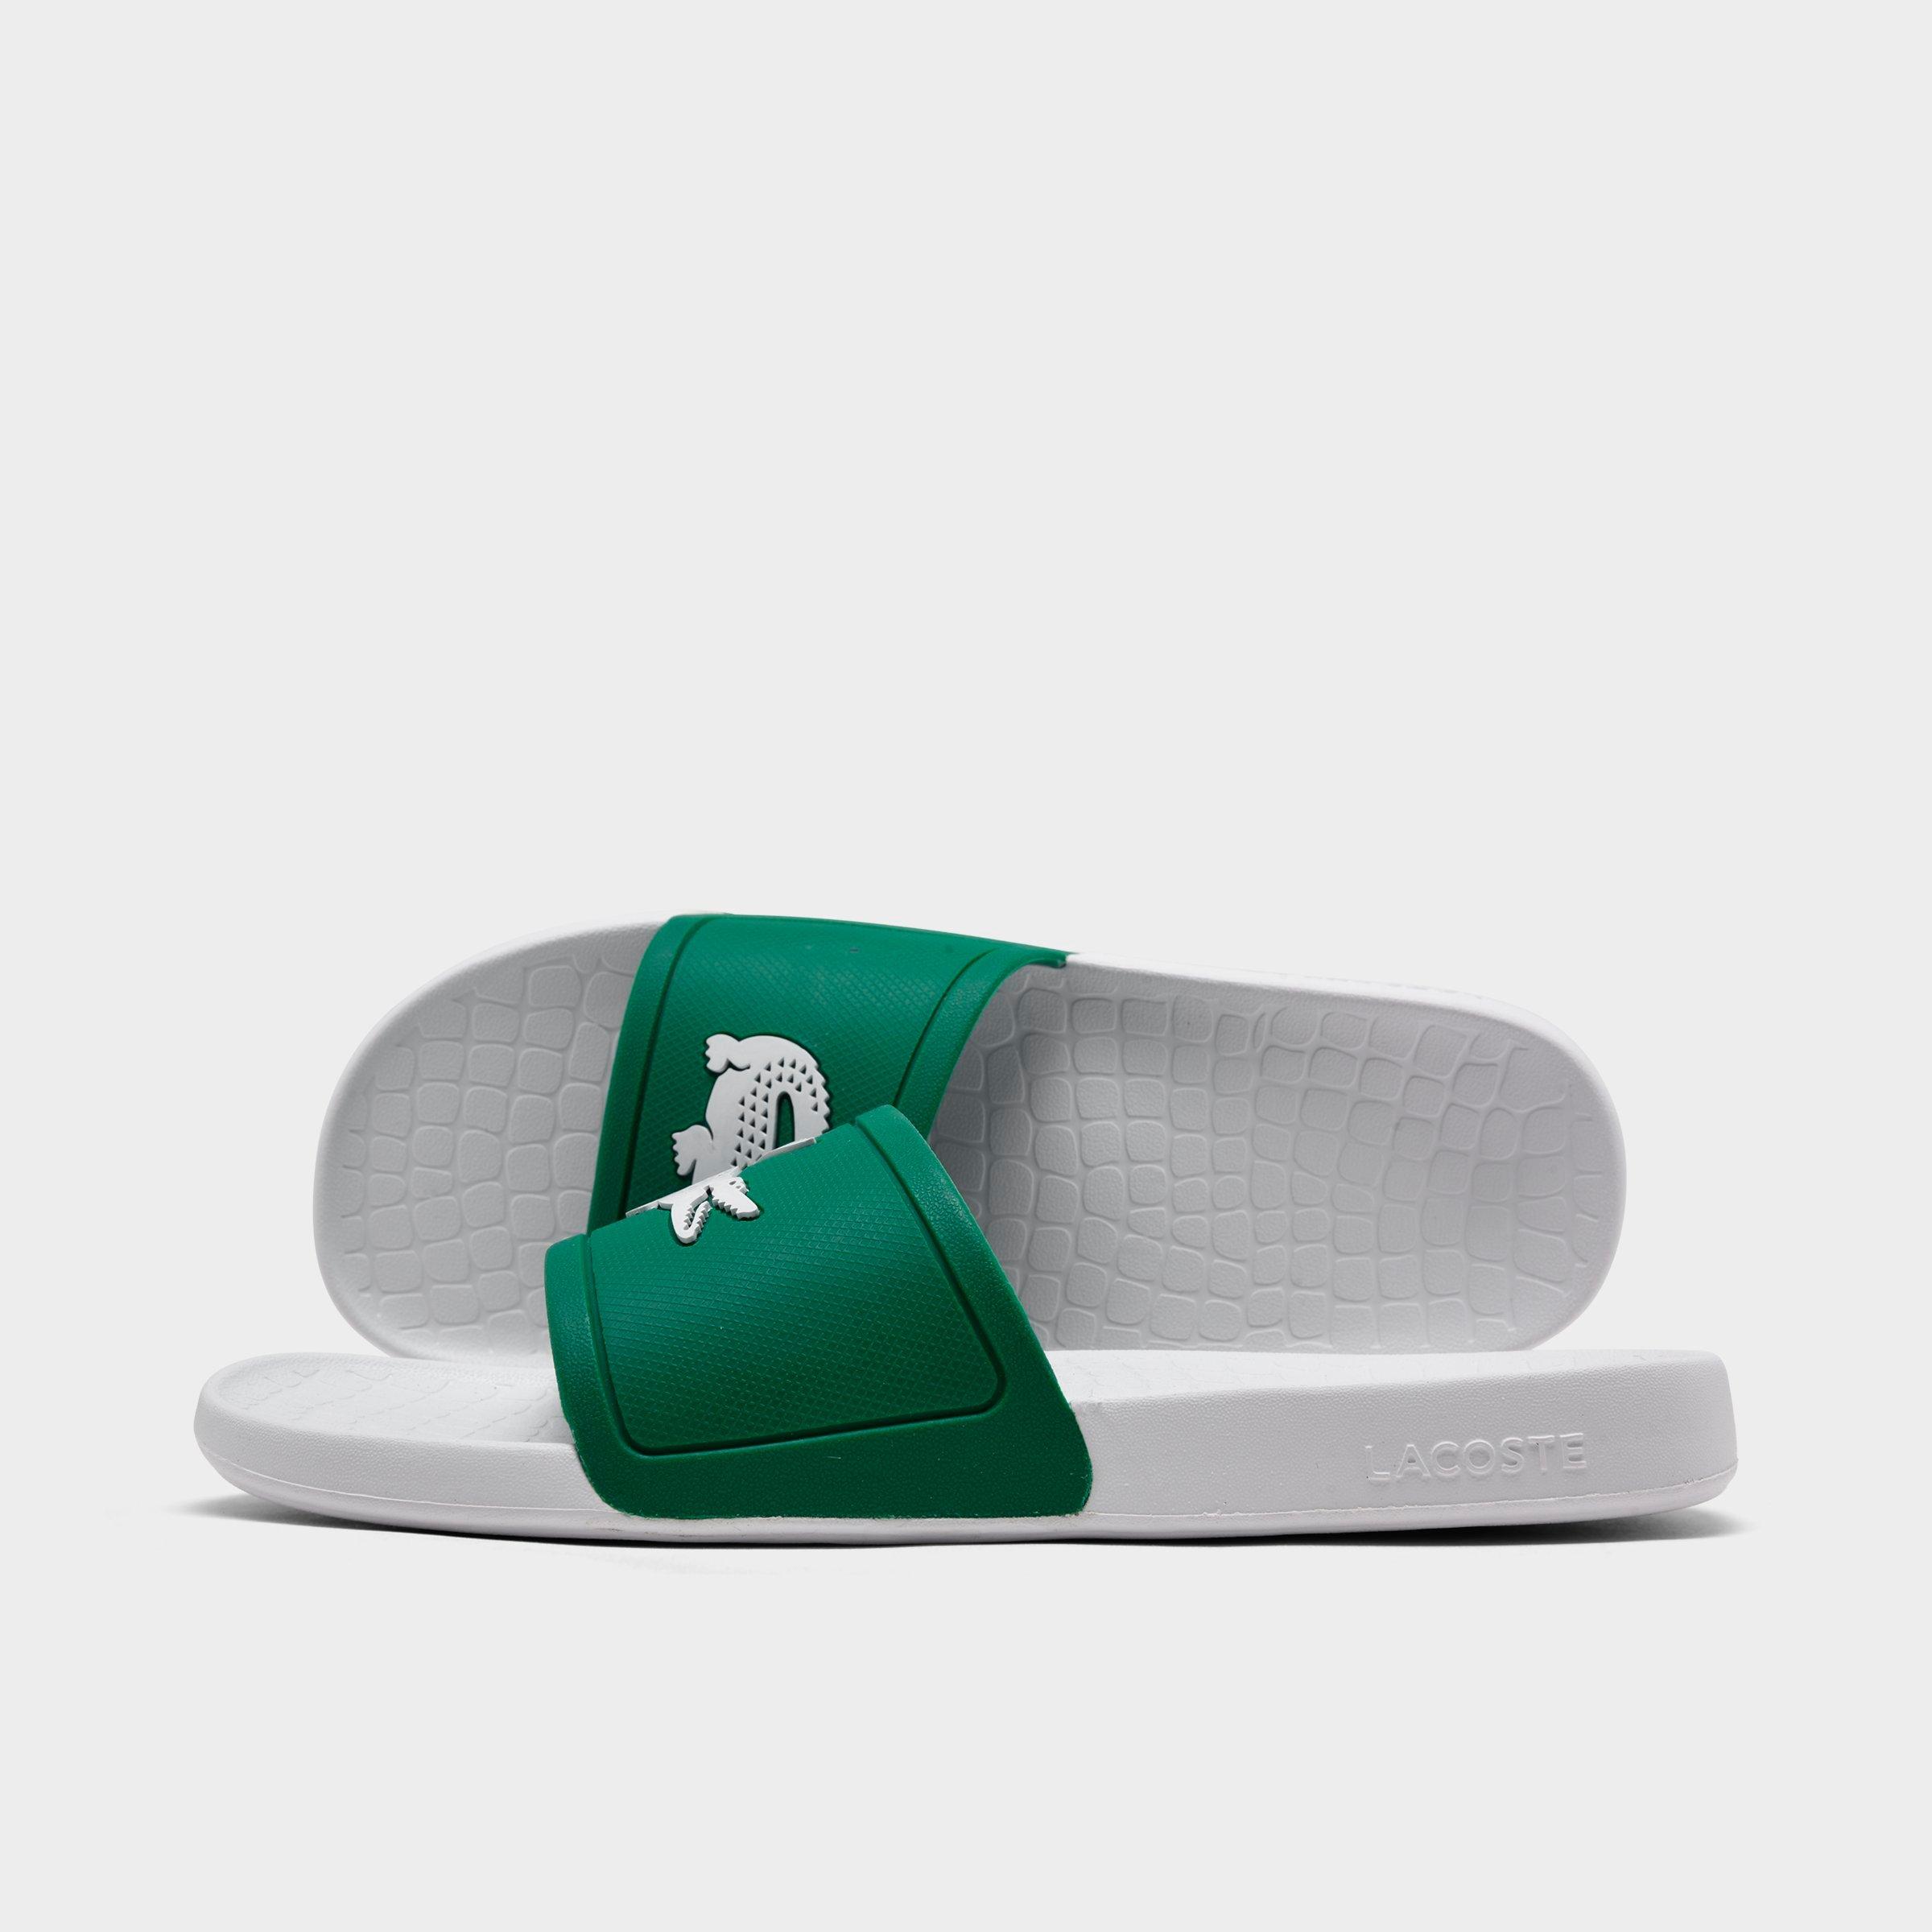 lacoste green sandals